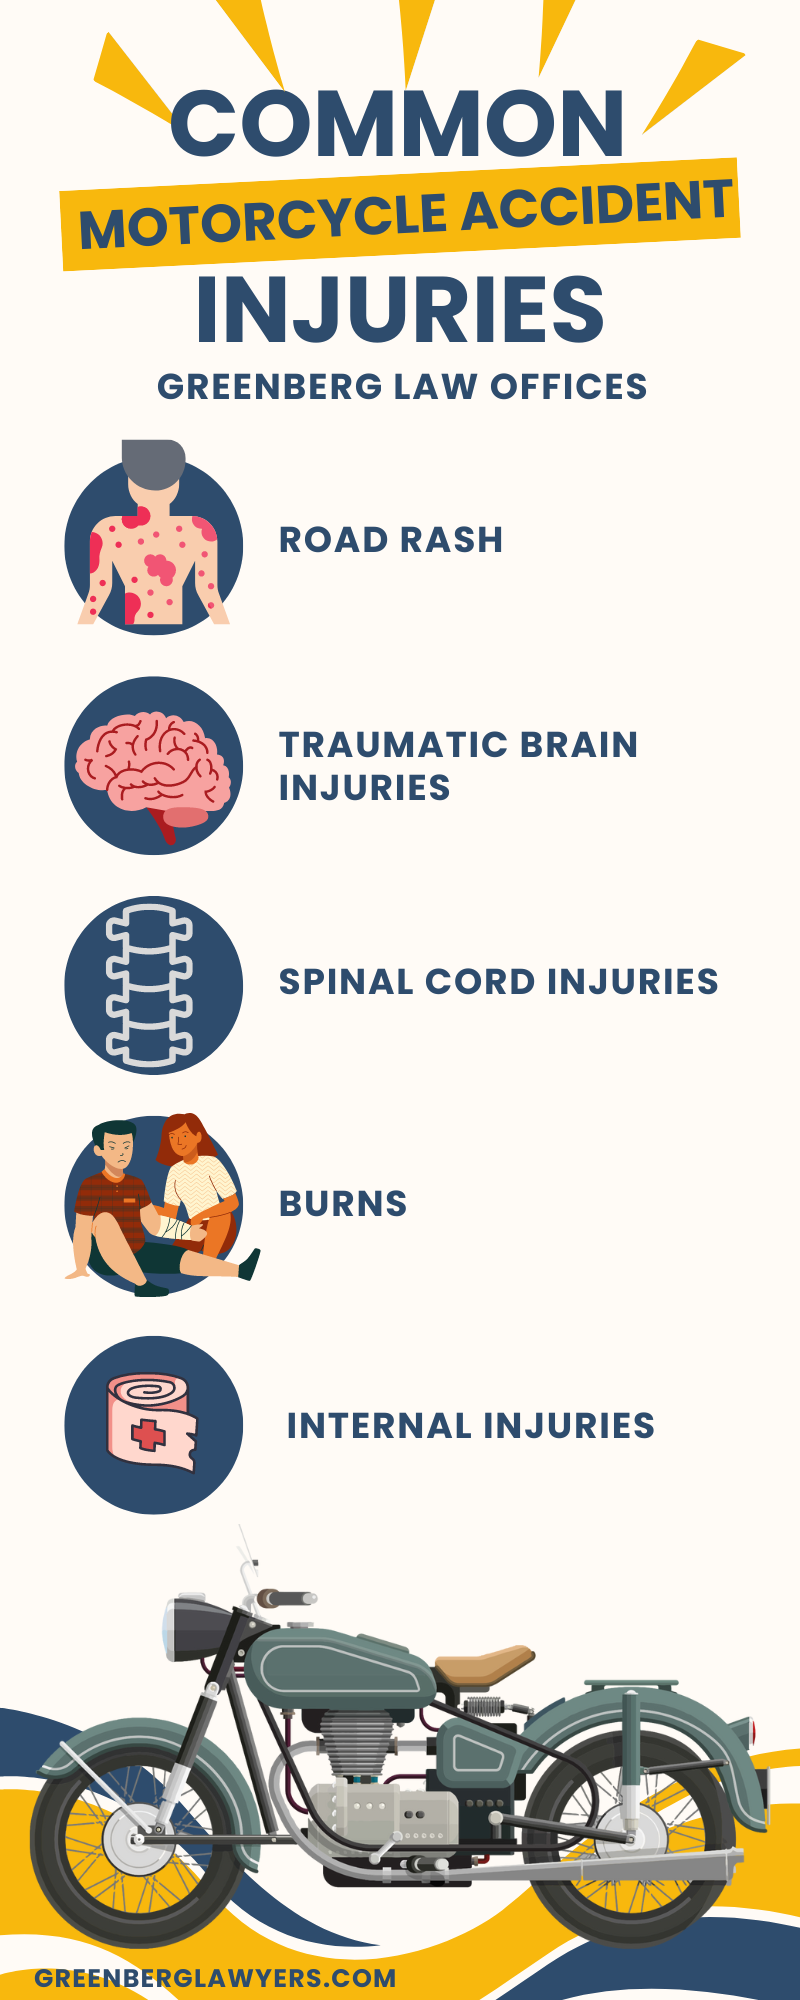 Common Motorcycle Accident Injuries Infographic